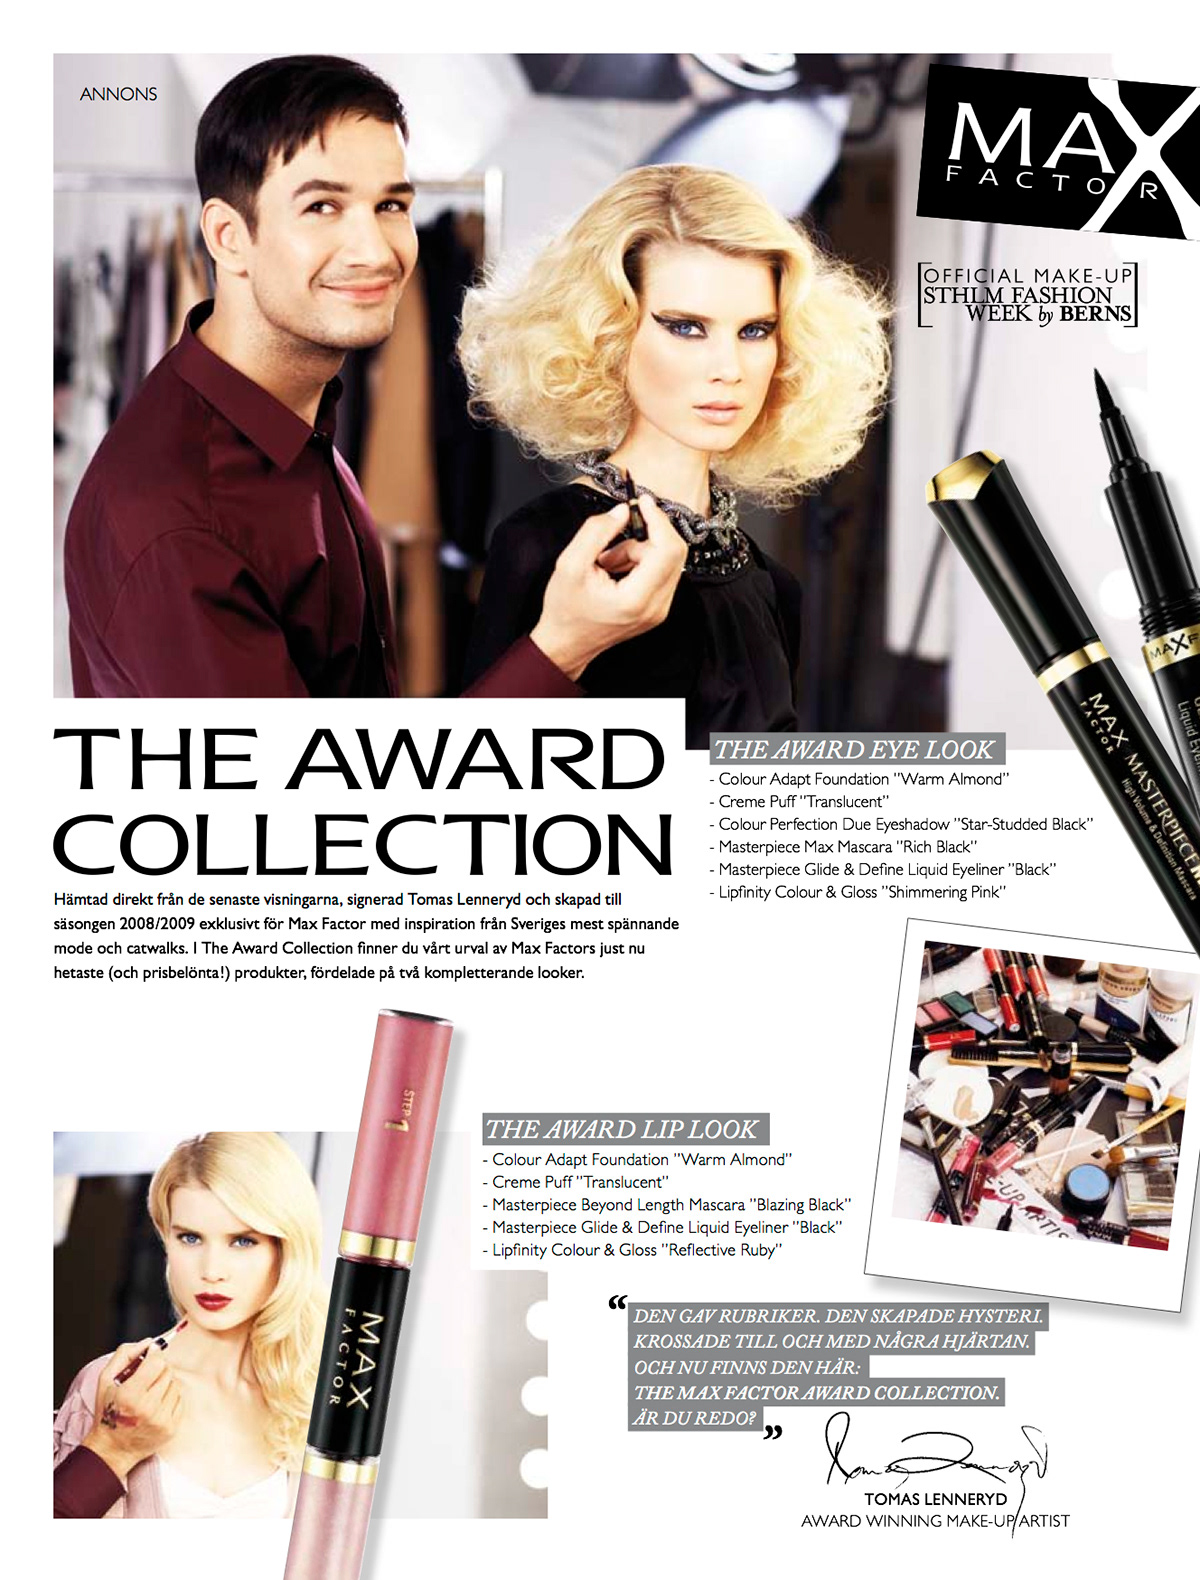 Max Factor advertorial mood film beauty cosmetics campaign expansion l'oreal Maybelline